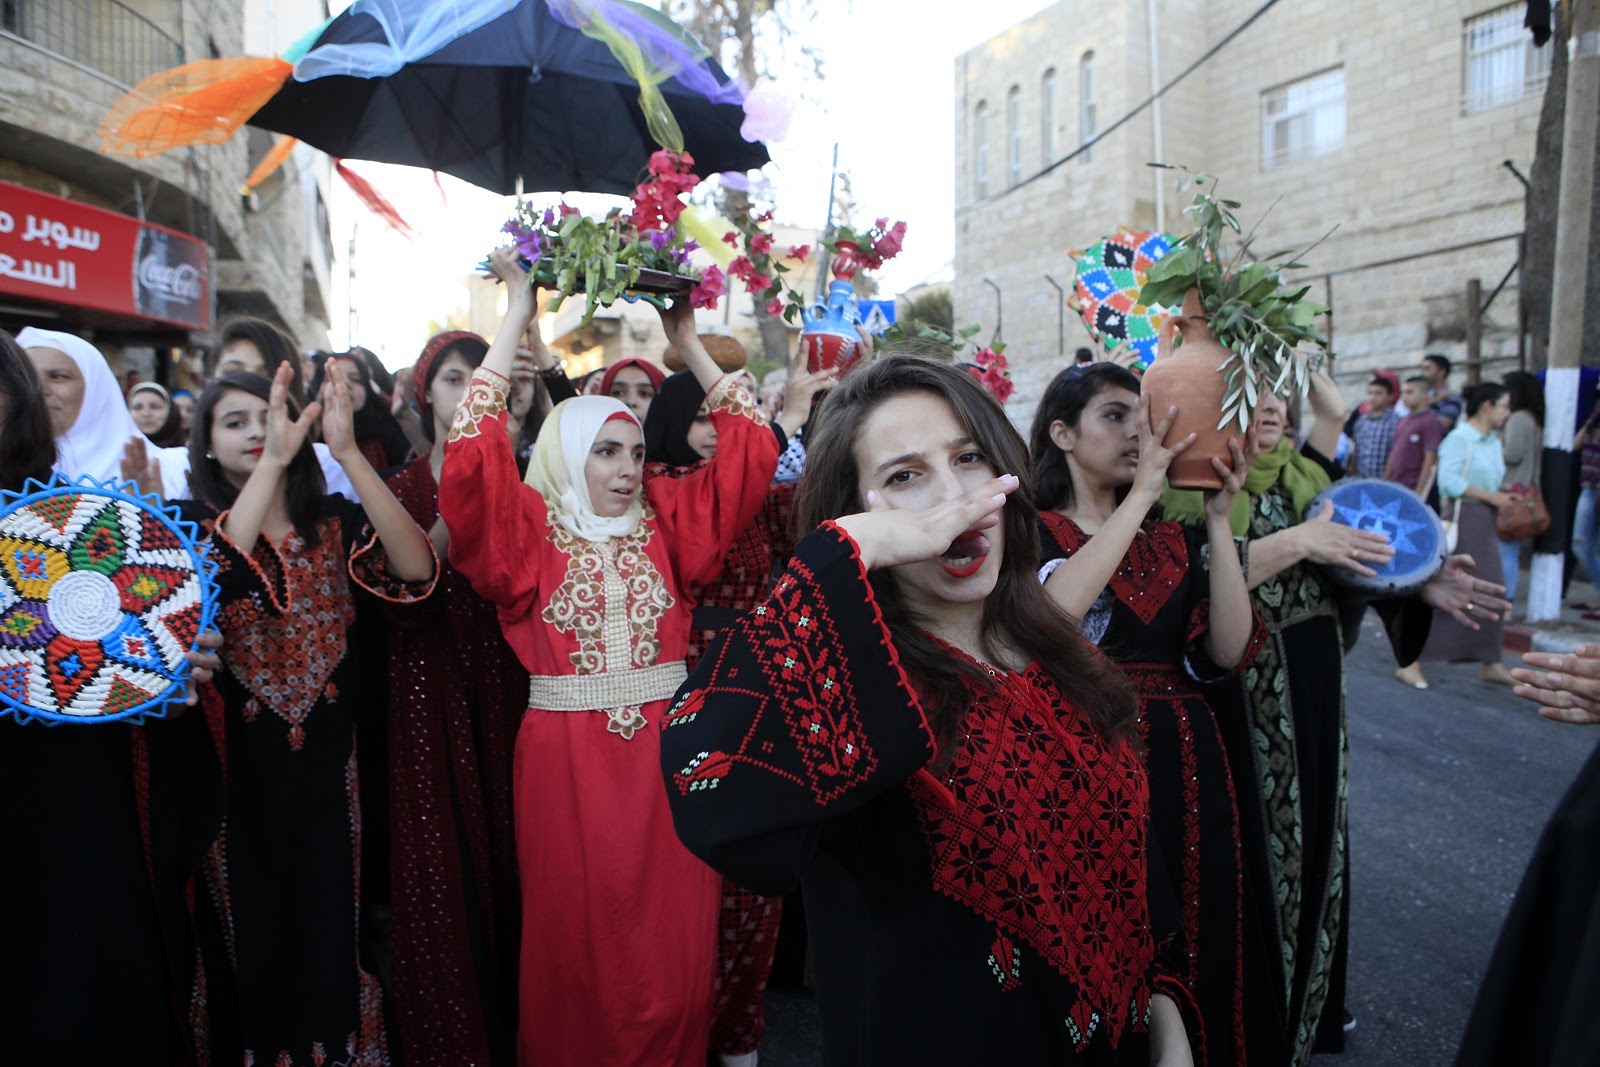 Palestinians Revive Wedding Traditions